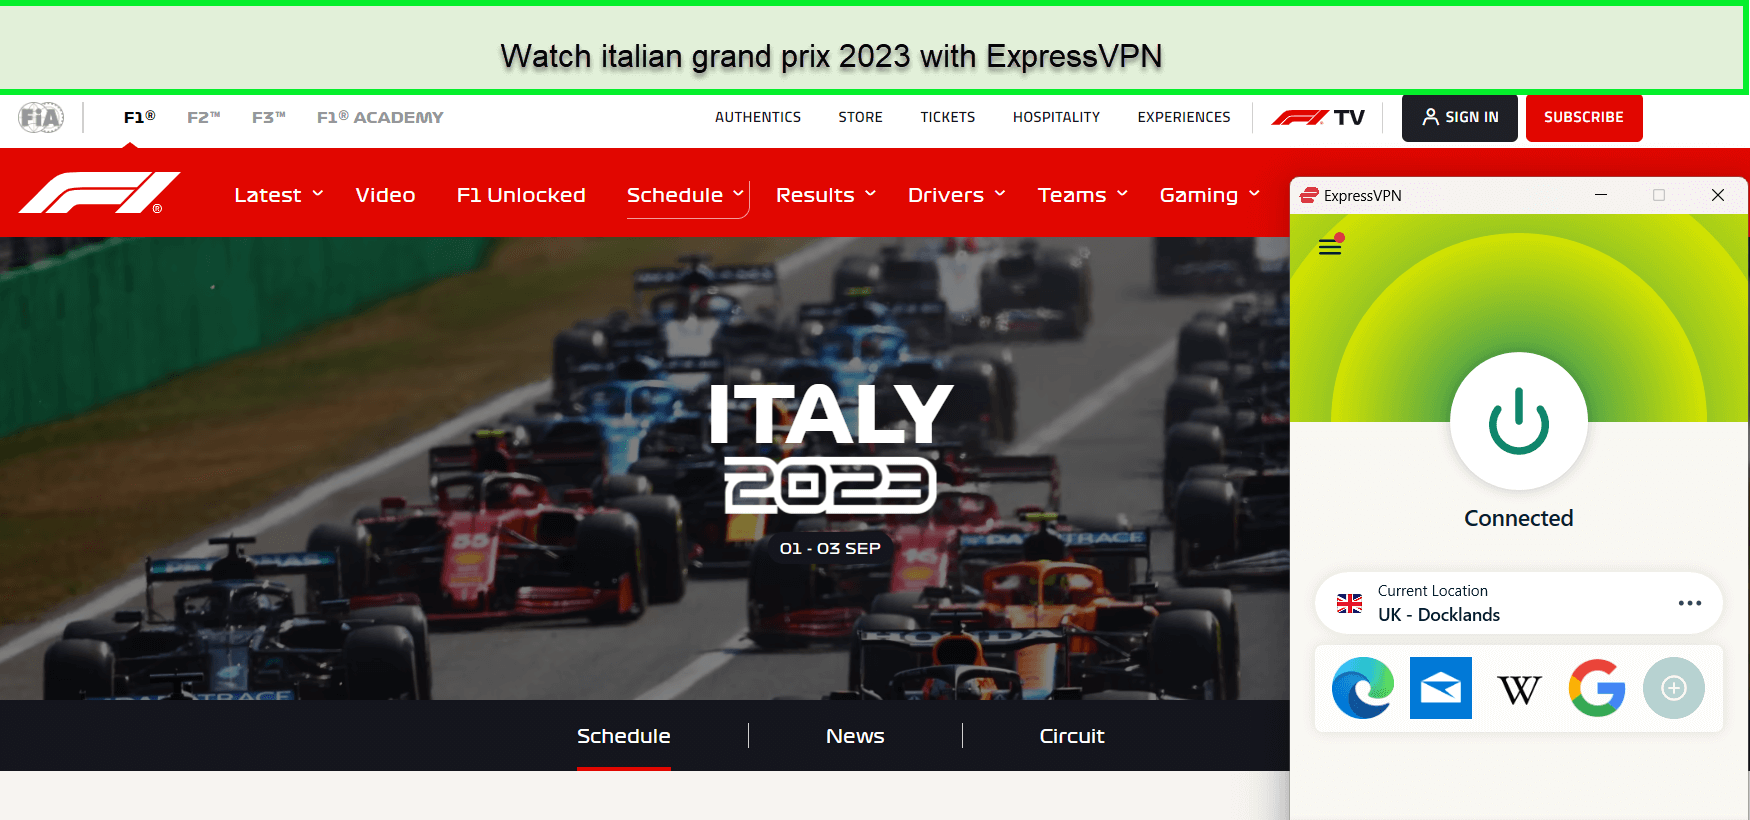 How-to-Watch-Italian-Grand-Prix-2023-in-Netherlands-on-ITV-with-ExpressVPN